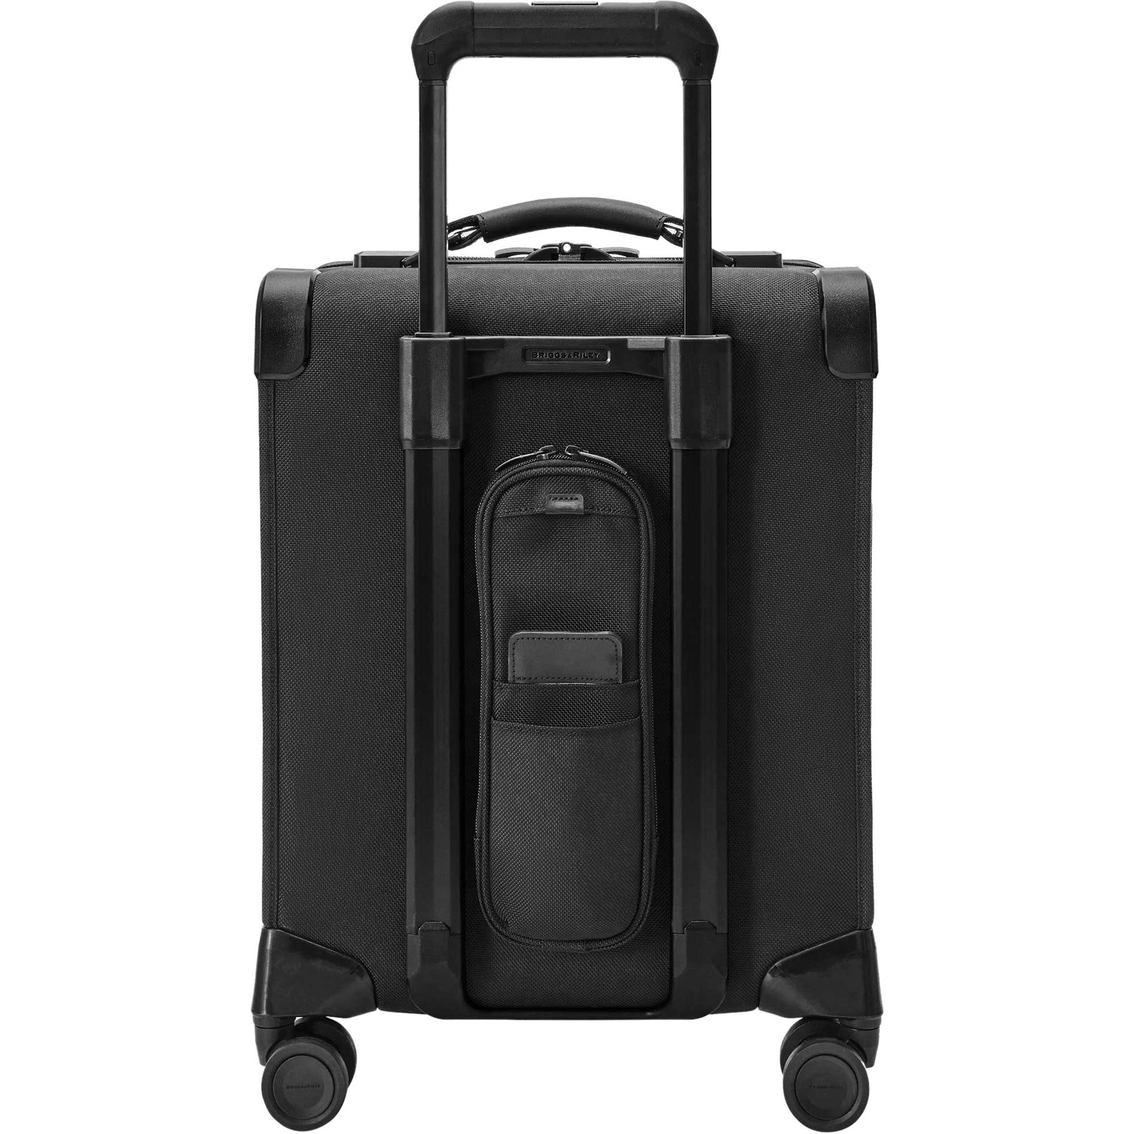 Briggs & Riley Baseline Compact Carry On Spinner, Black - Image 2 of 9